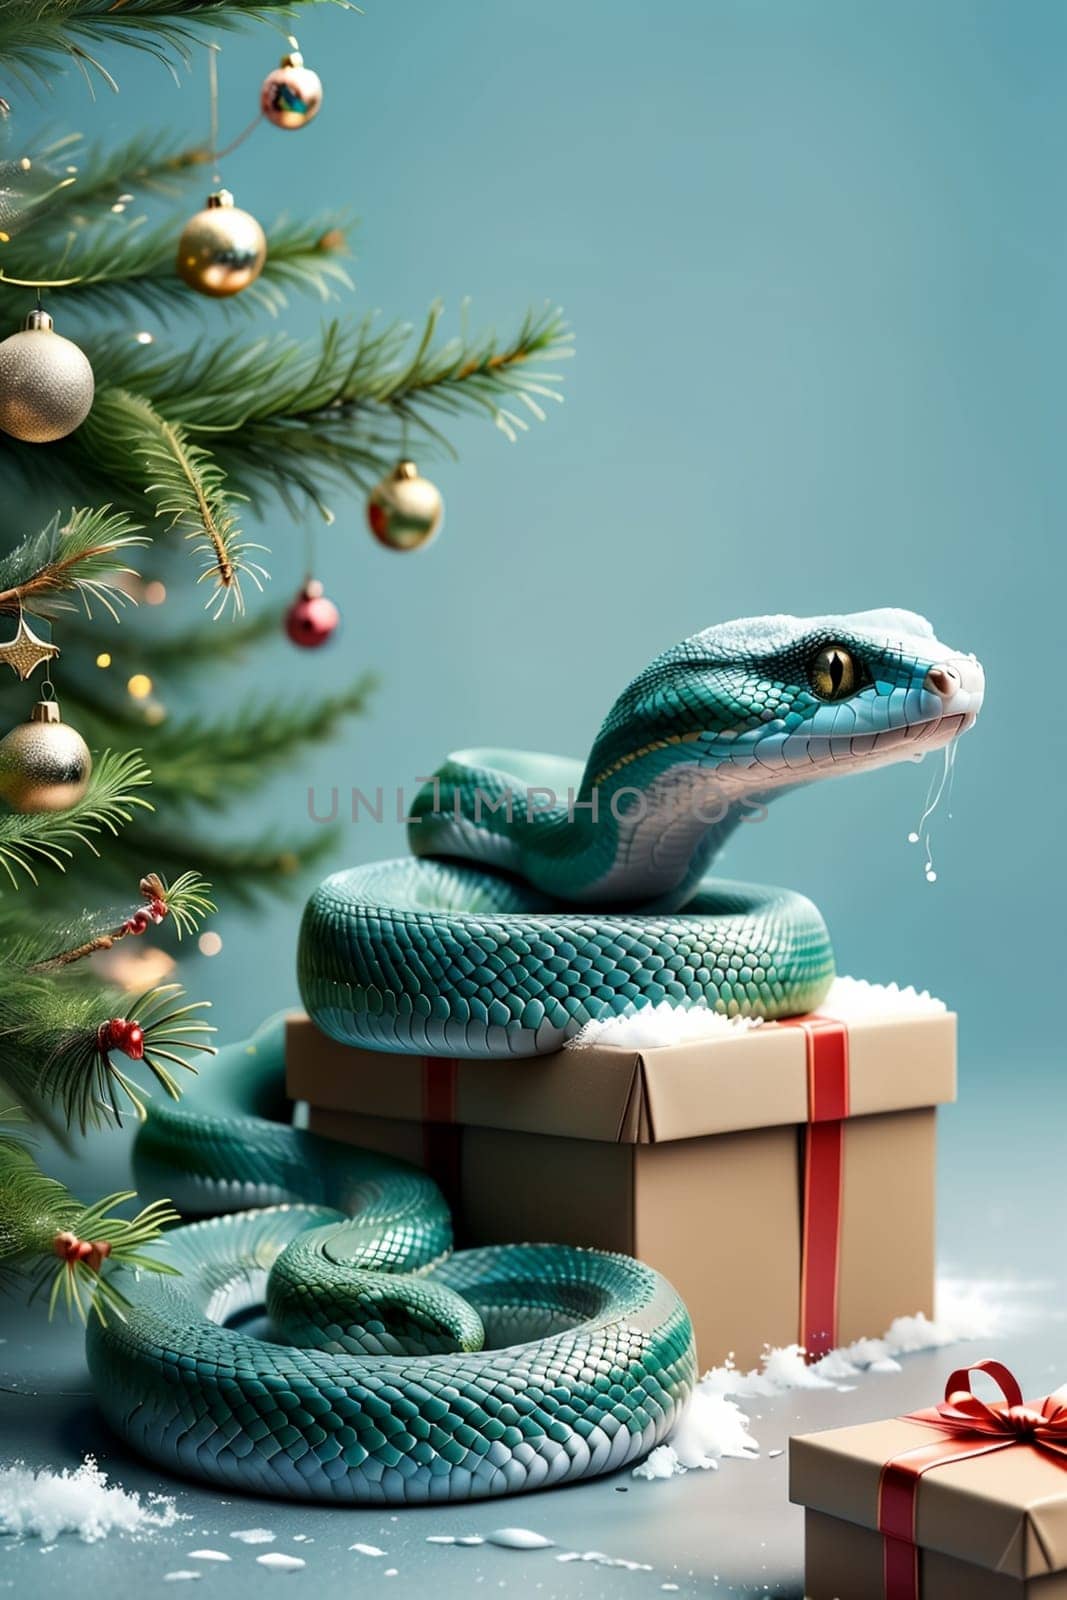 New Year snake with gifts under the Christmas tree, New Year card .